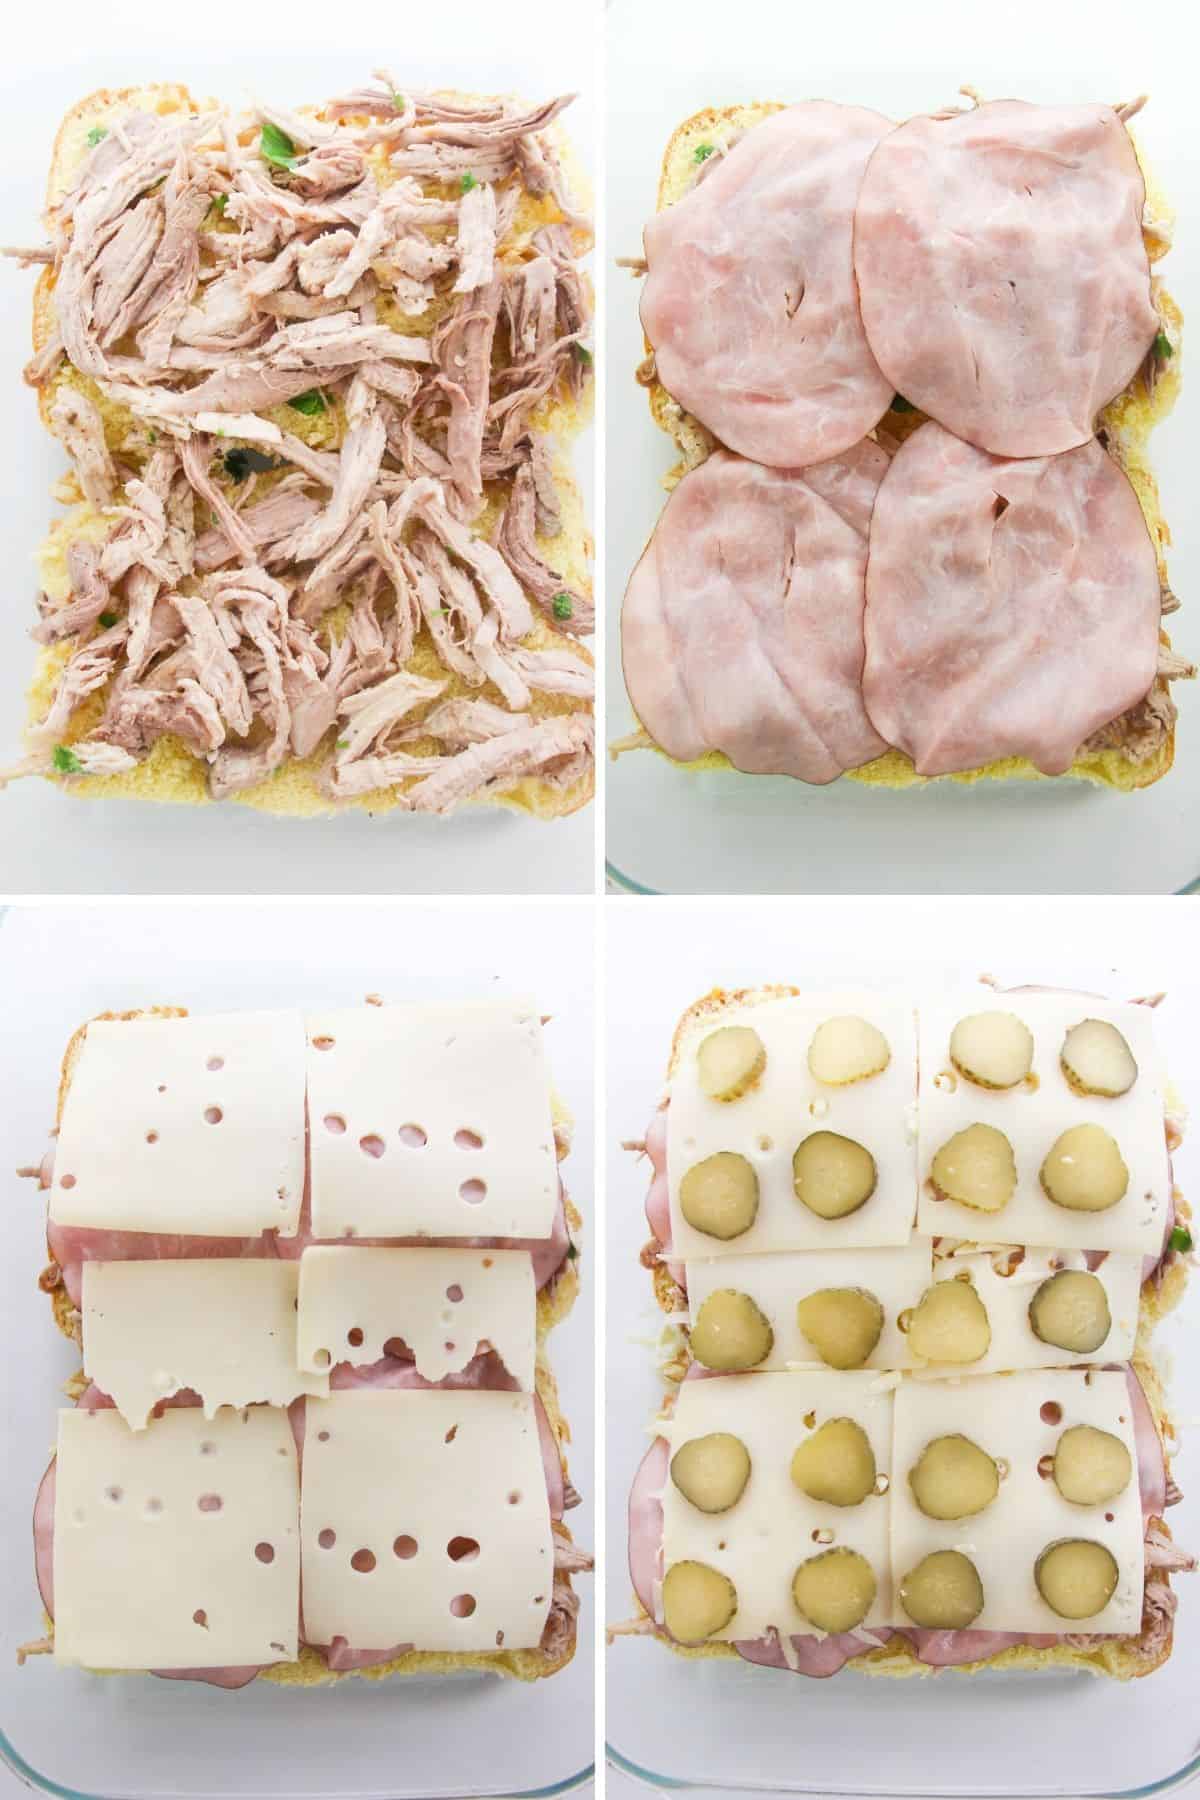 Four image collage of ingredients added to slider rolls: roast pork, deli ham, swiss cheese, and pickles.